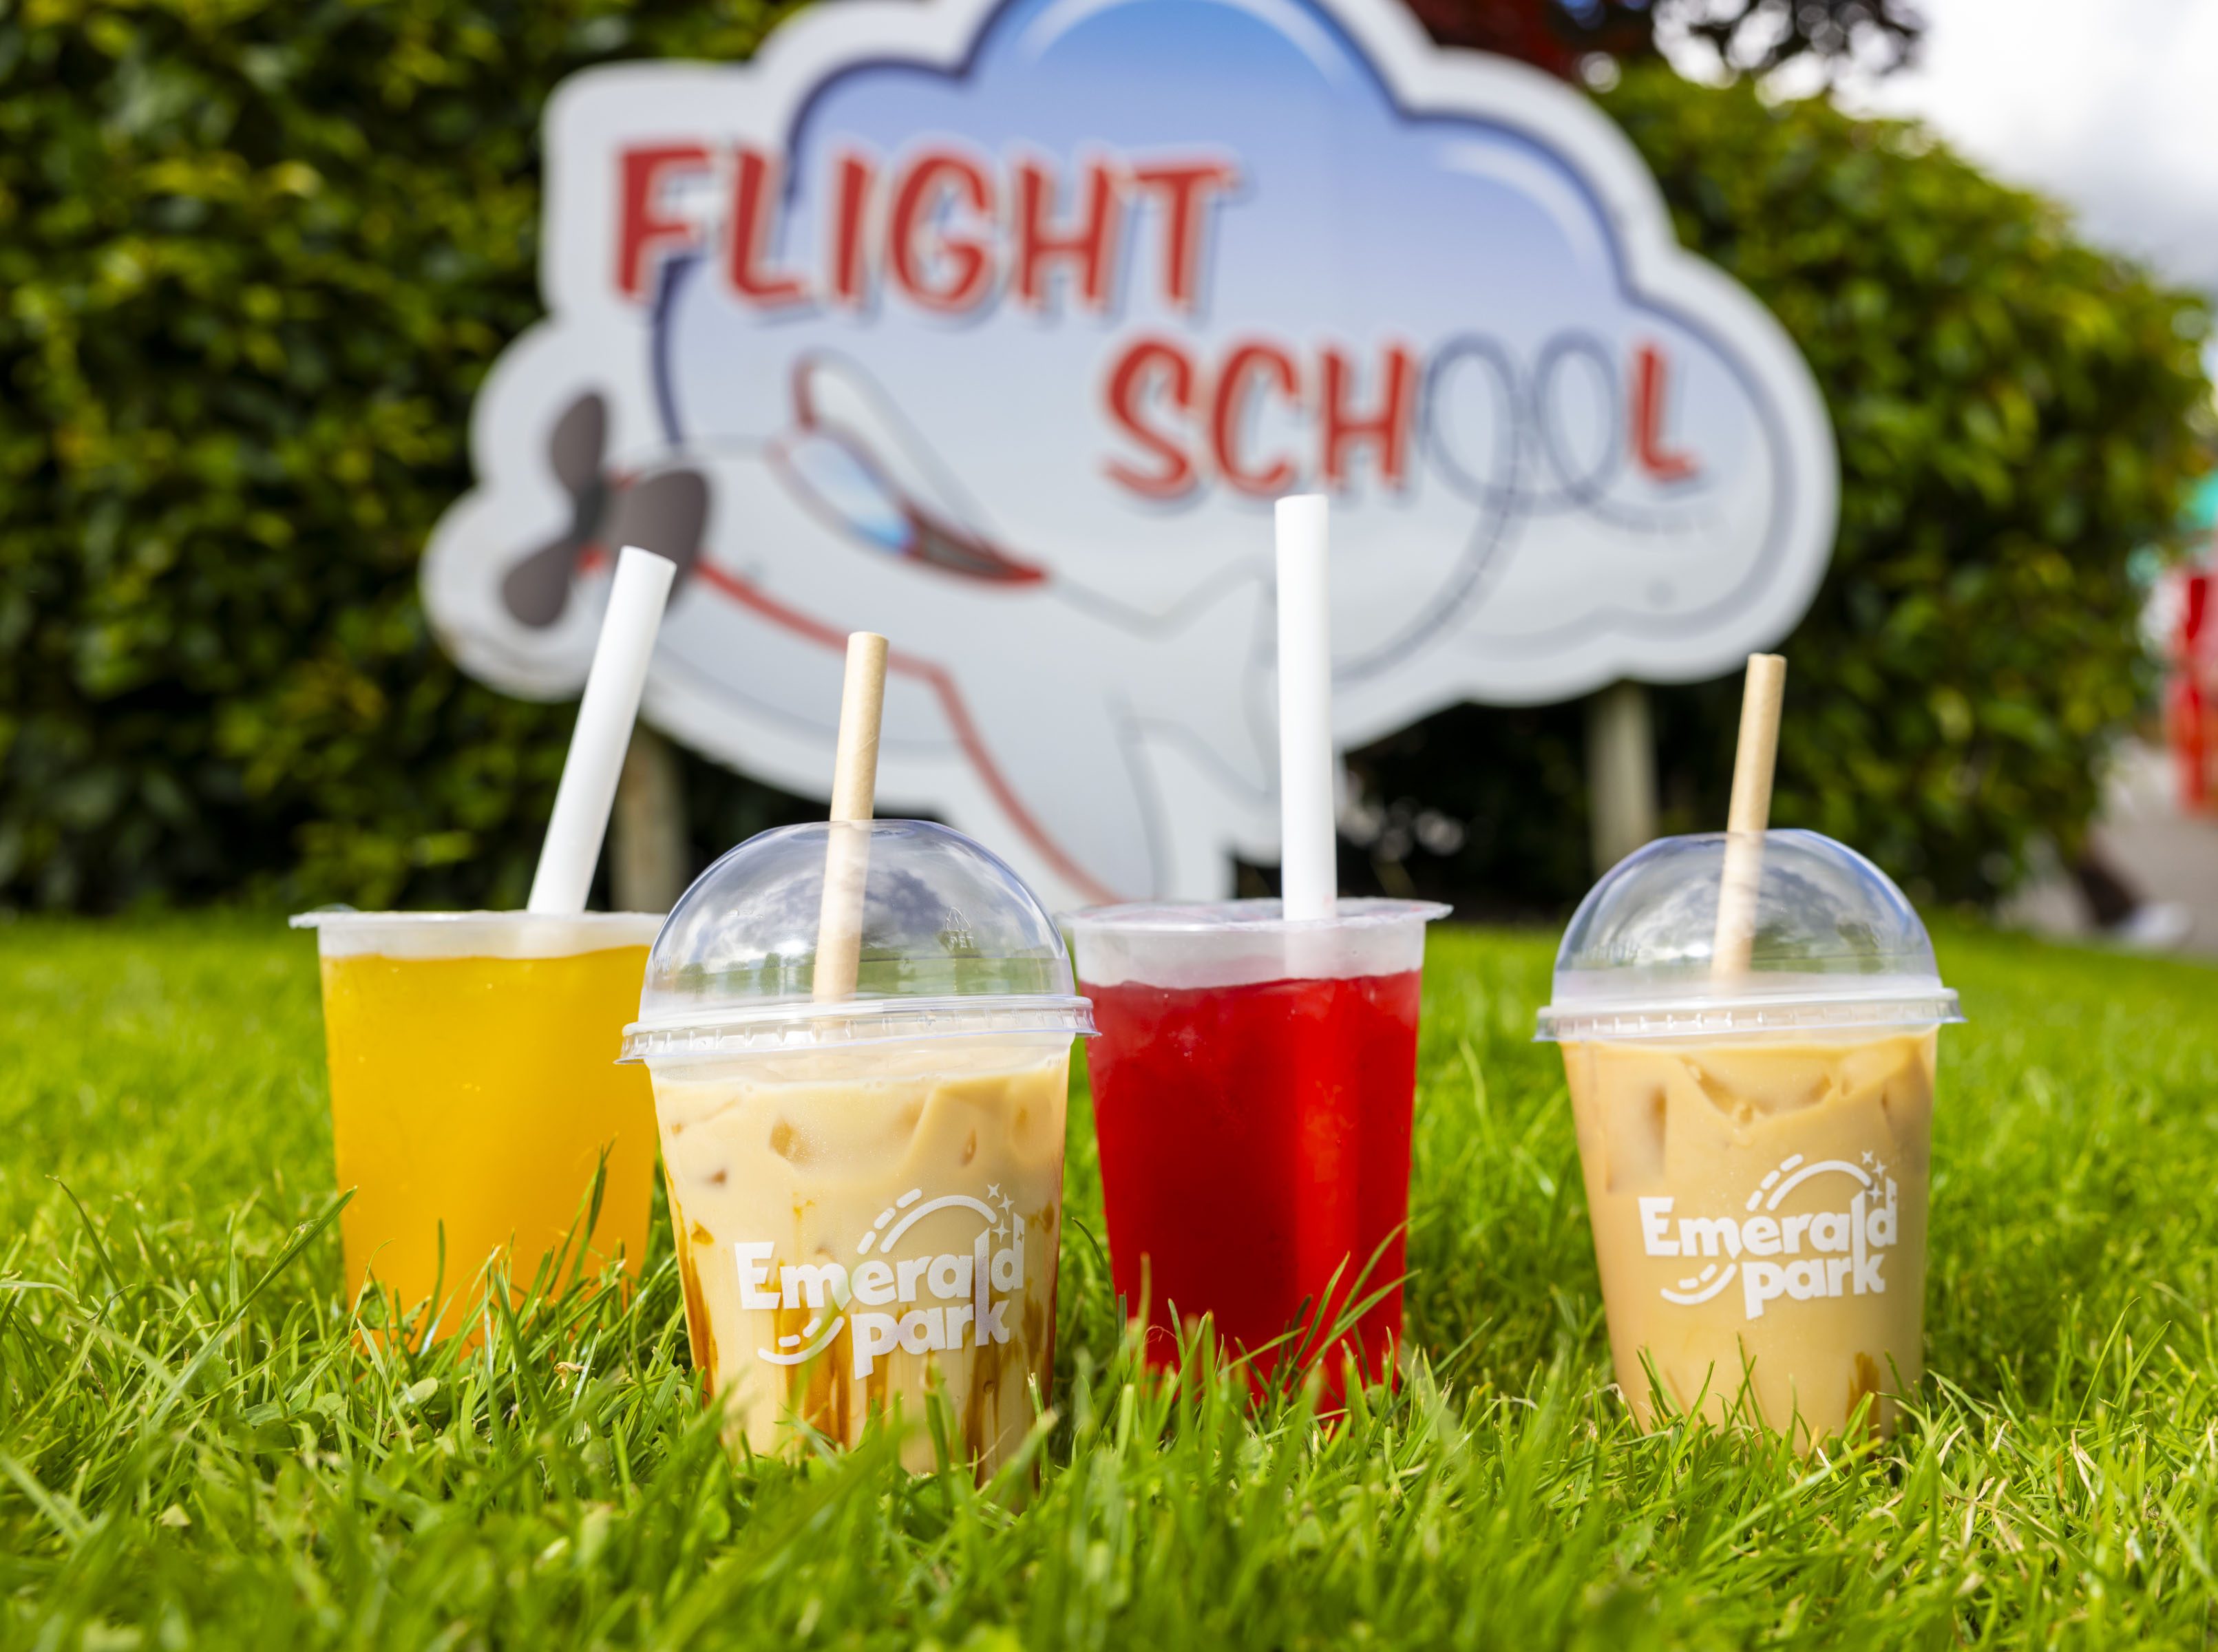 two iced coffees and a red and yellow bubble tea placed on the grass in front of a Flight School sign